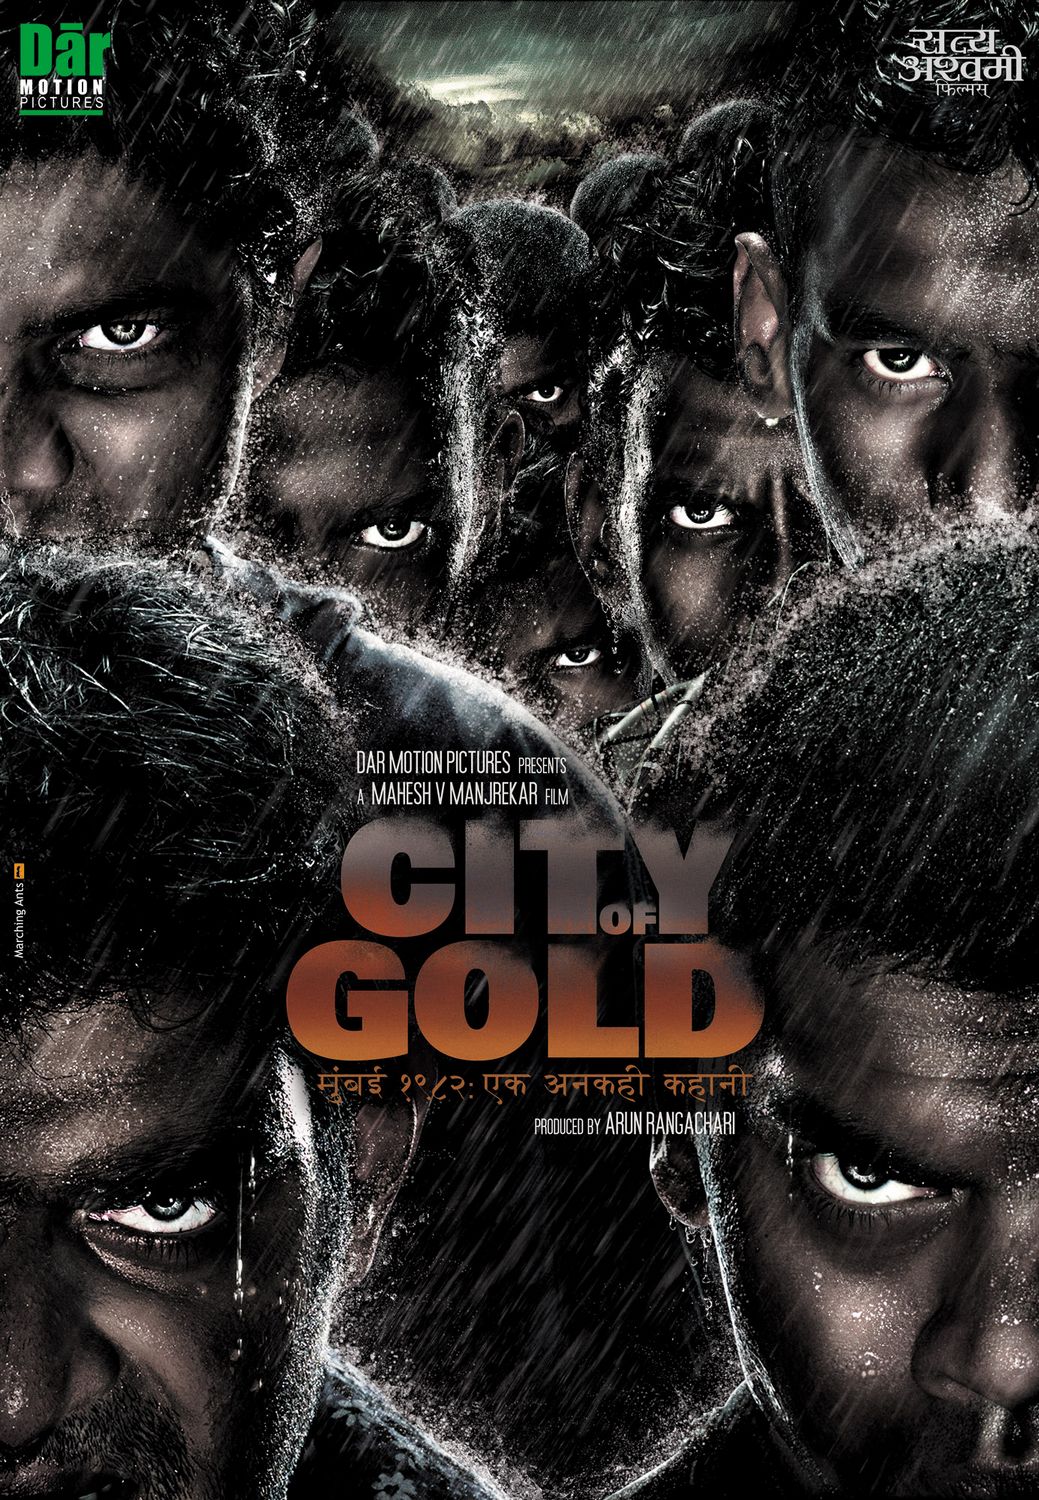 Extra Large Movie Poster Image for City of Gold (#2 of 3)